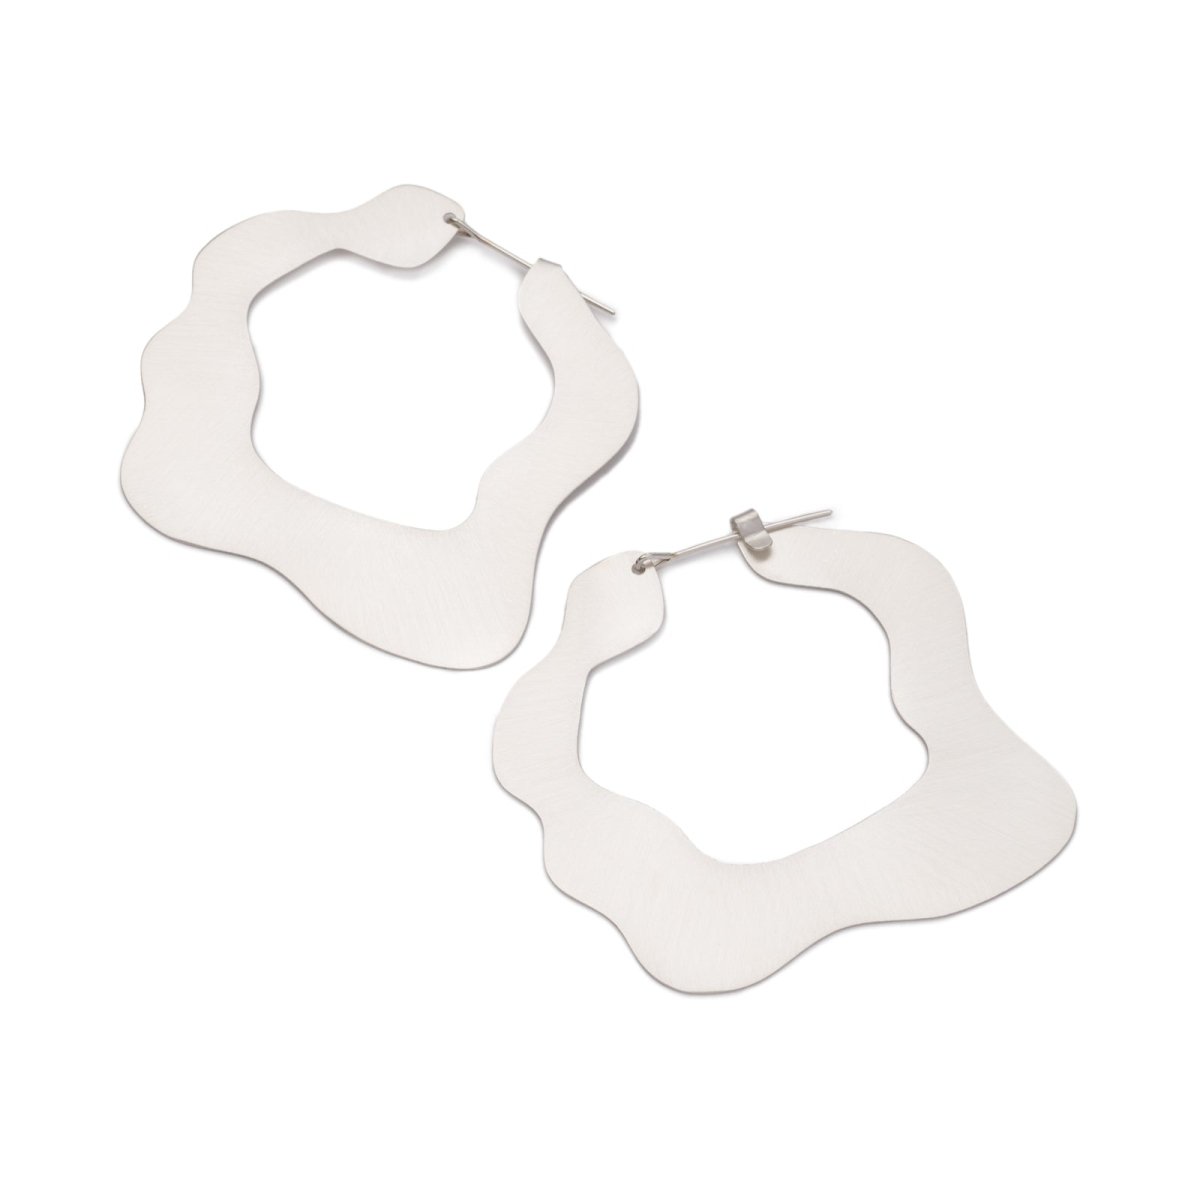 Large, glam, brushed sterling silver statement hoop earrings, featuring a flat profile and curvy edges, and completed with sterling silver-filled ear wires. Hand-crafted in Portland, Oregon. 